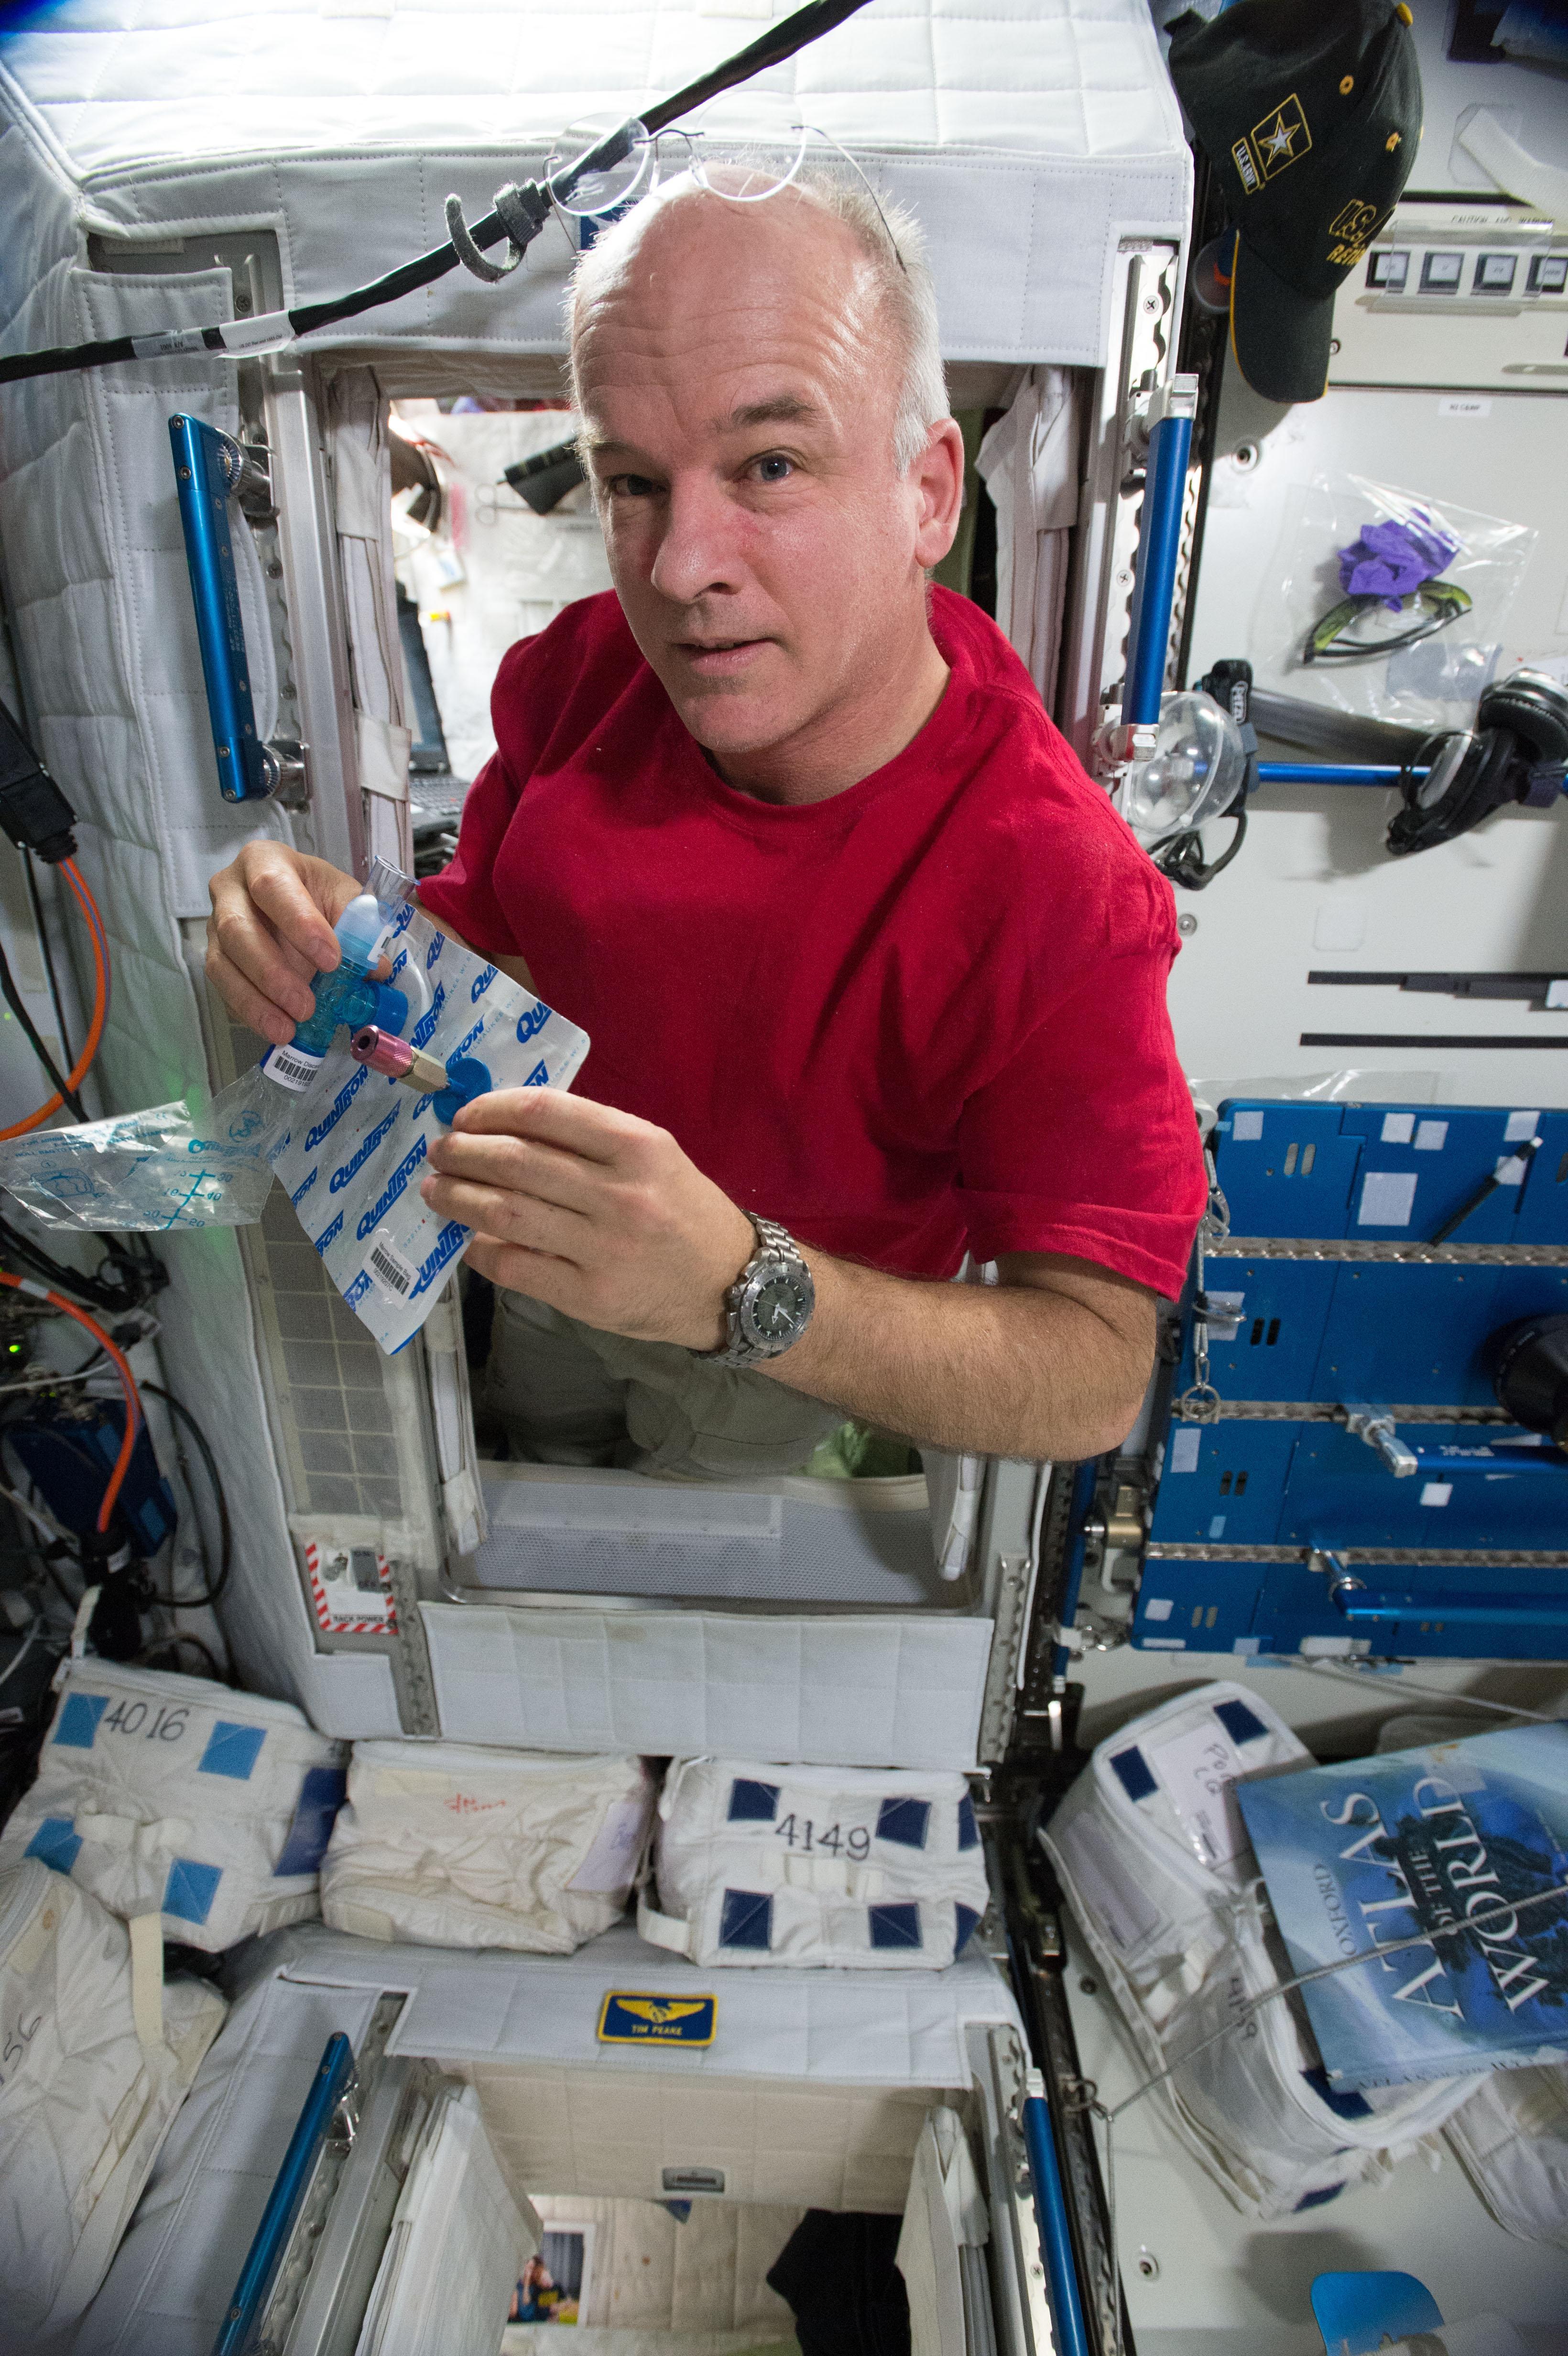 https://www.nasa.gov/mission_pages/station/research/experiments/iss047e131794.jpg